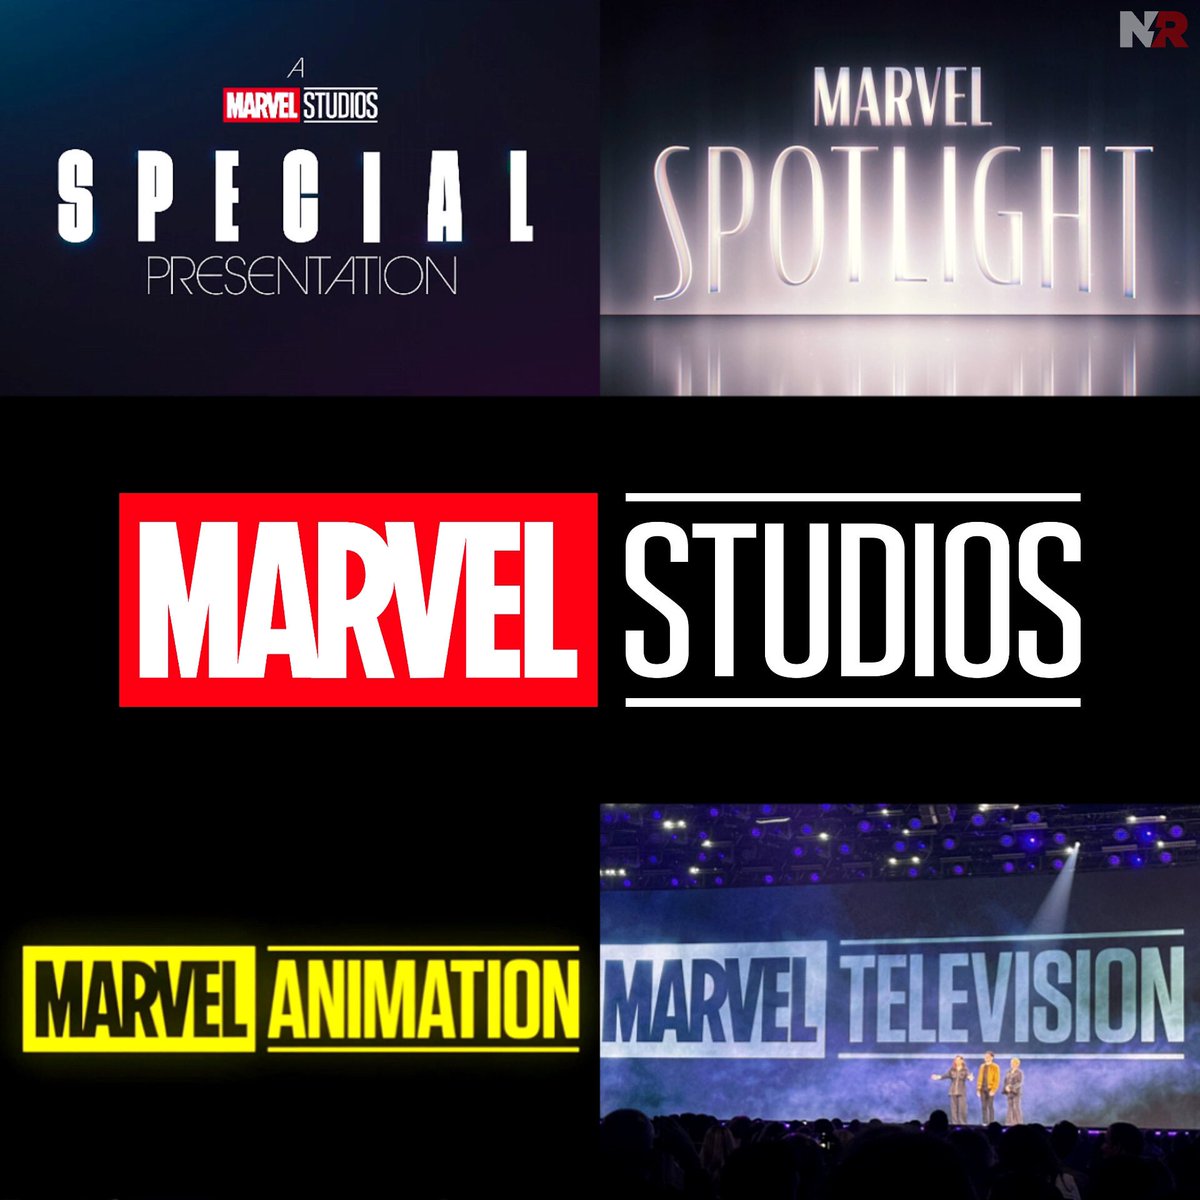 All of the current Marvel banners.